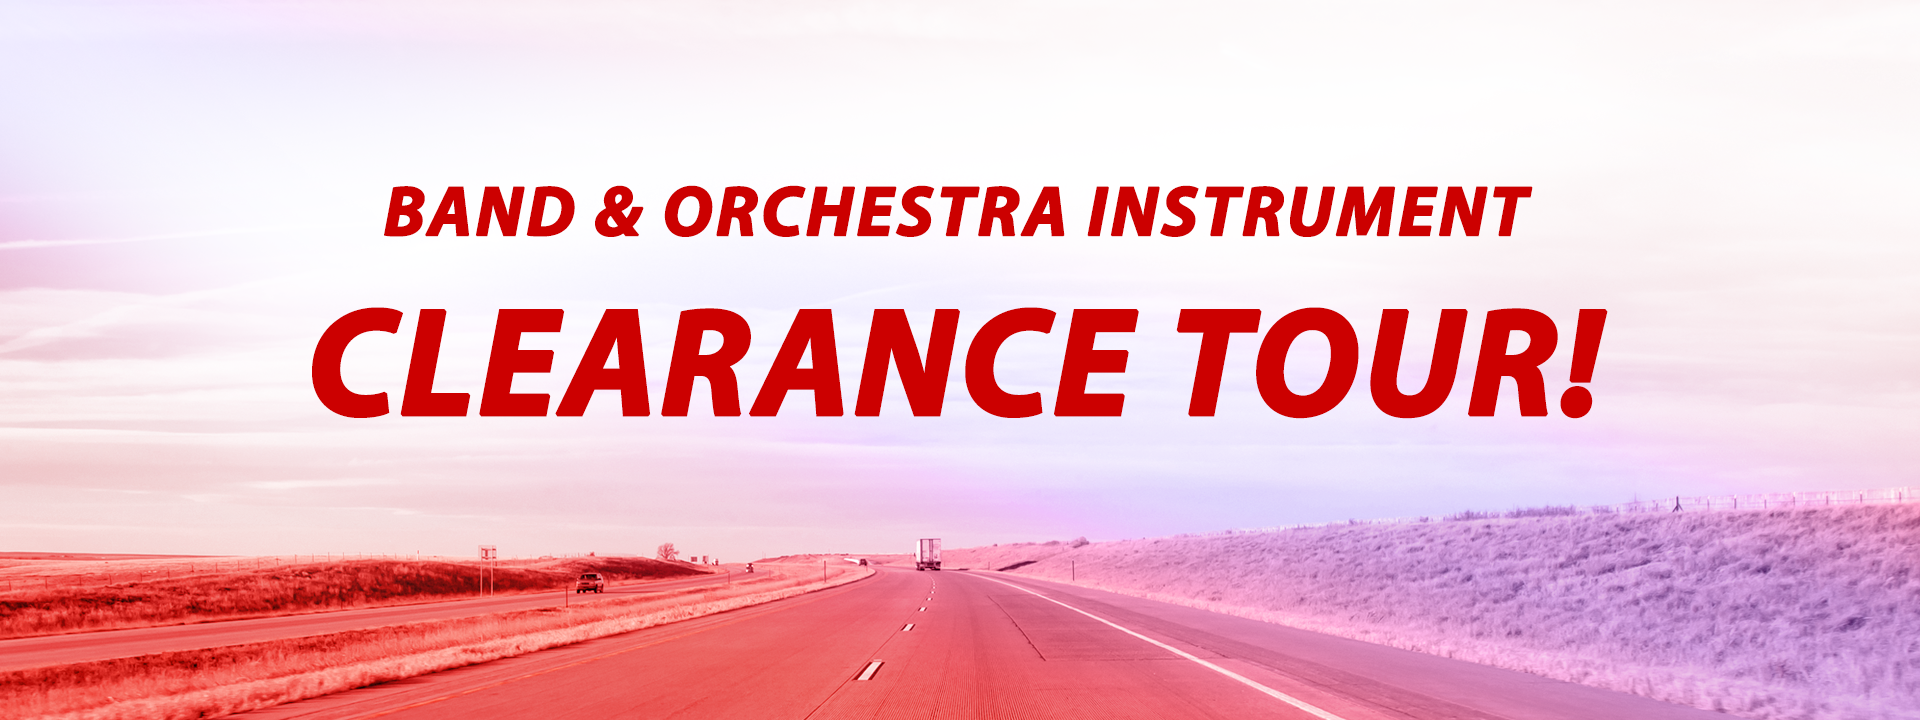 Band & Orchestra Instrument Clearance Tour 2019!